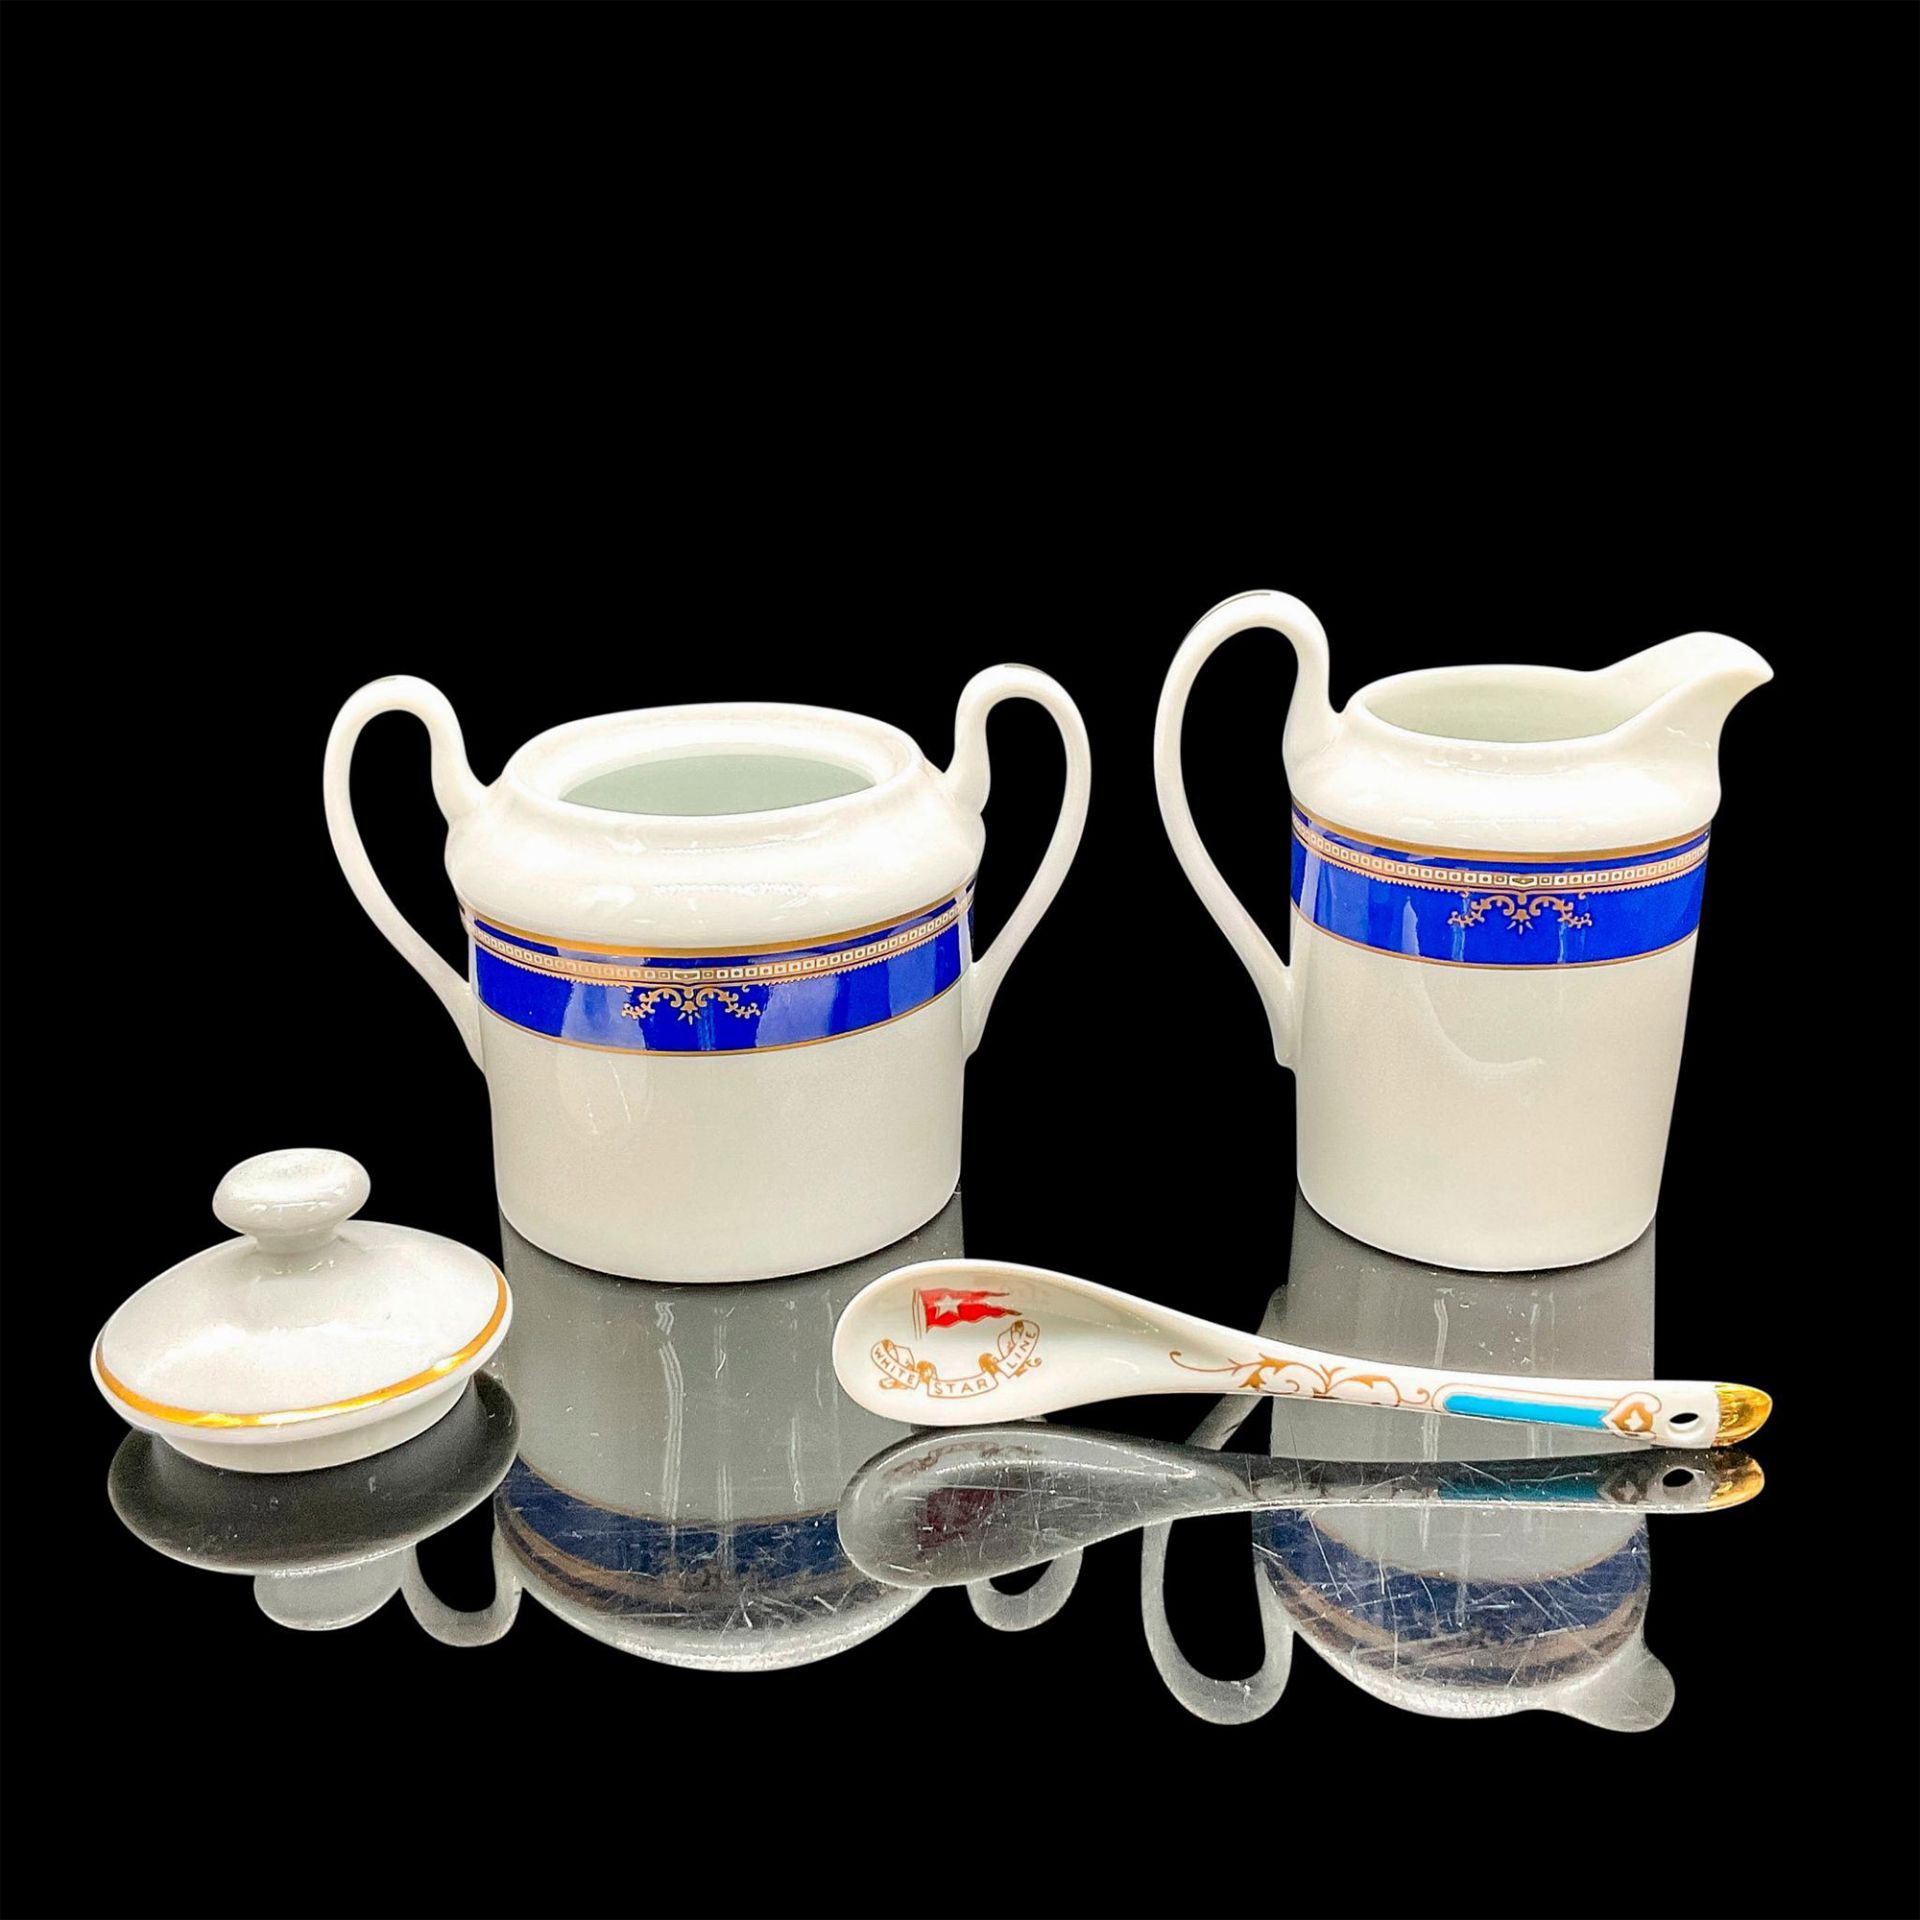 6pc Tea Serving Set, Queen Mary and Titanic Replicas - Image 15 of 16